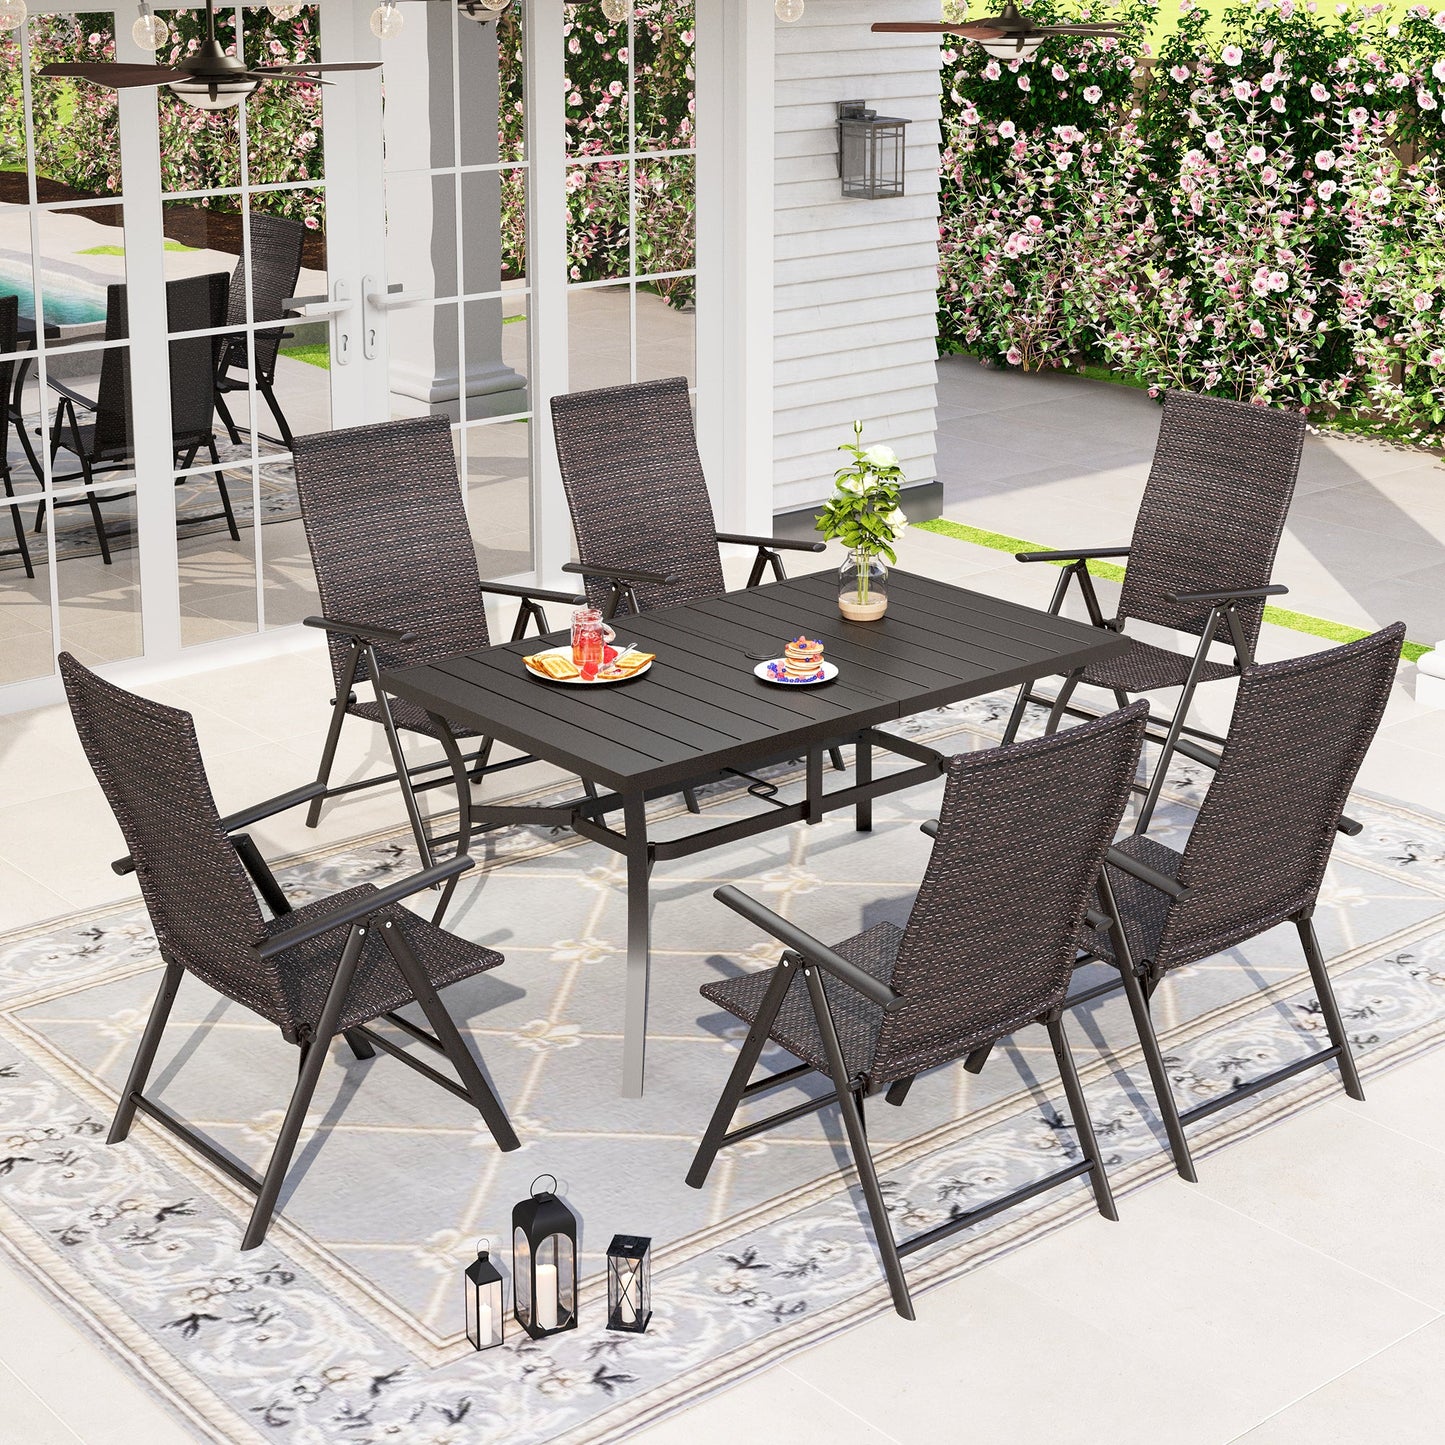 Sophia & William 7 Pieces Outdoor Patio Dining Set with Foldable Adjustable PE Rattan Chairs and Rectangular Metal Dining Table